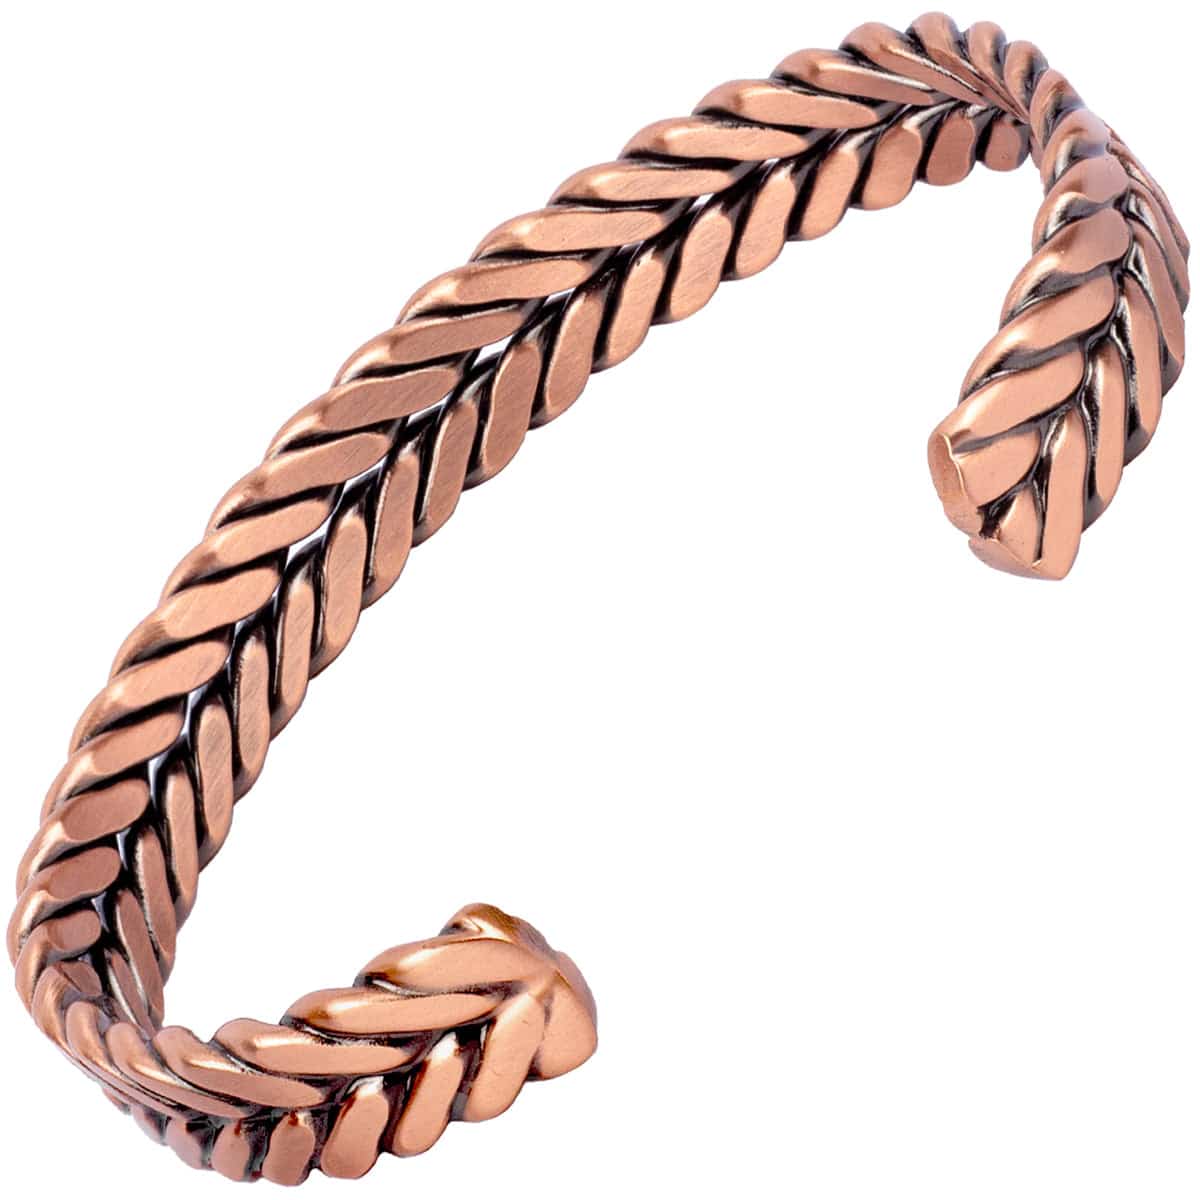 Woven Copper Magnetic Therapy Bracelet Cuff